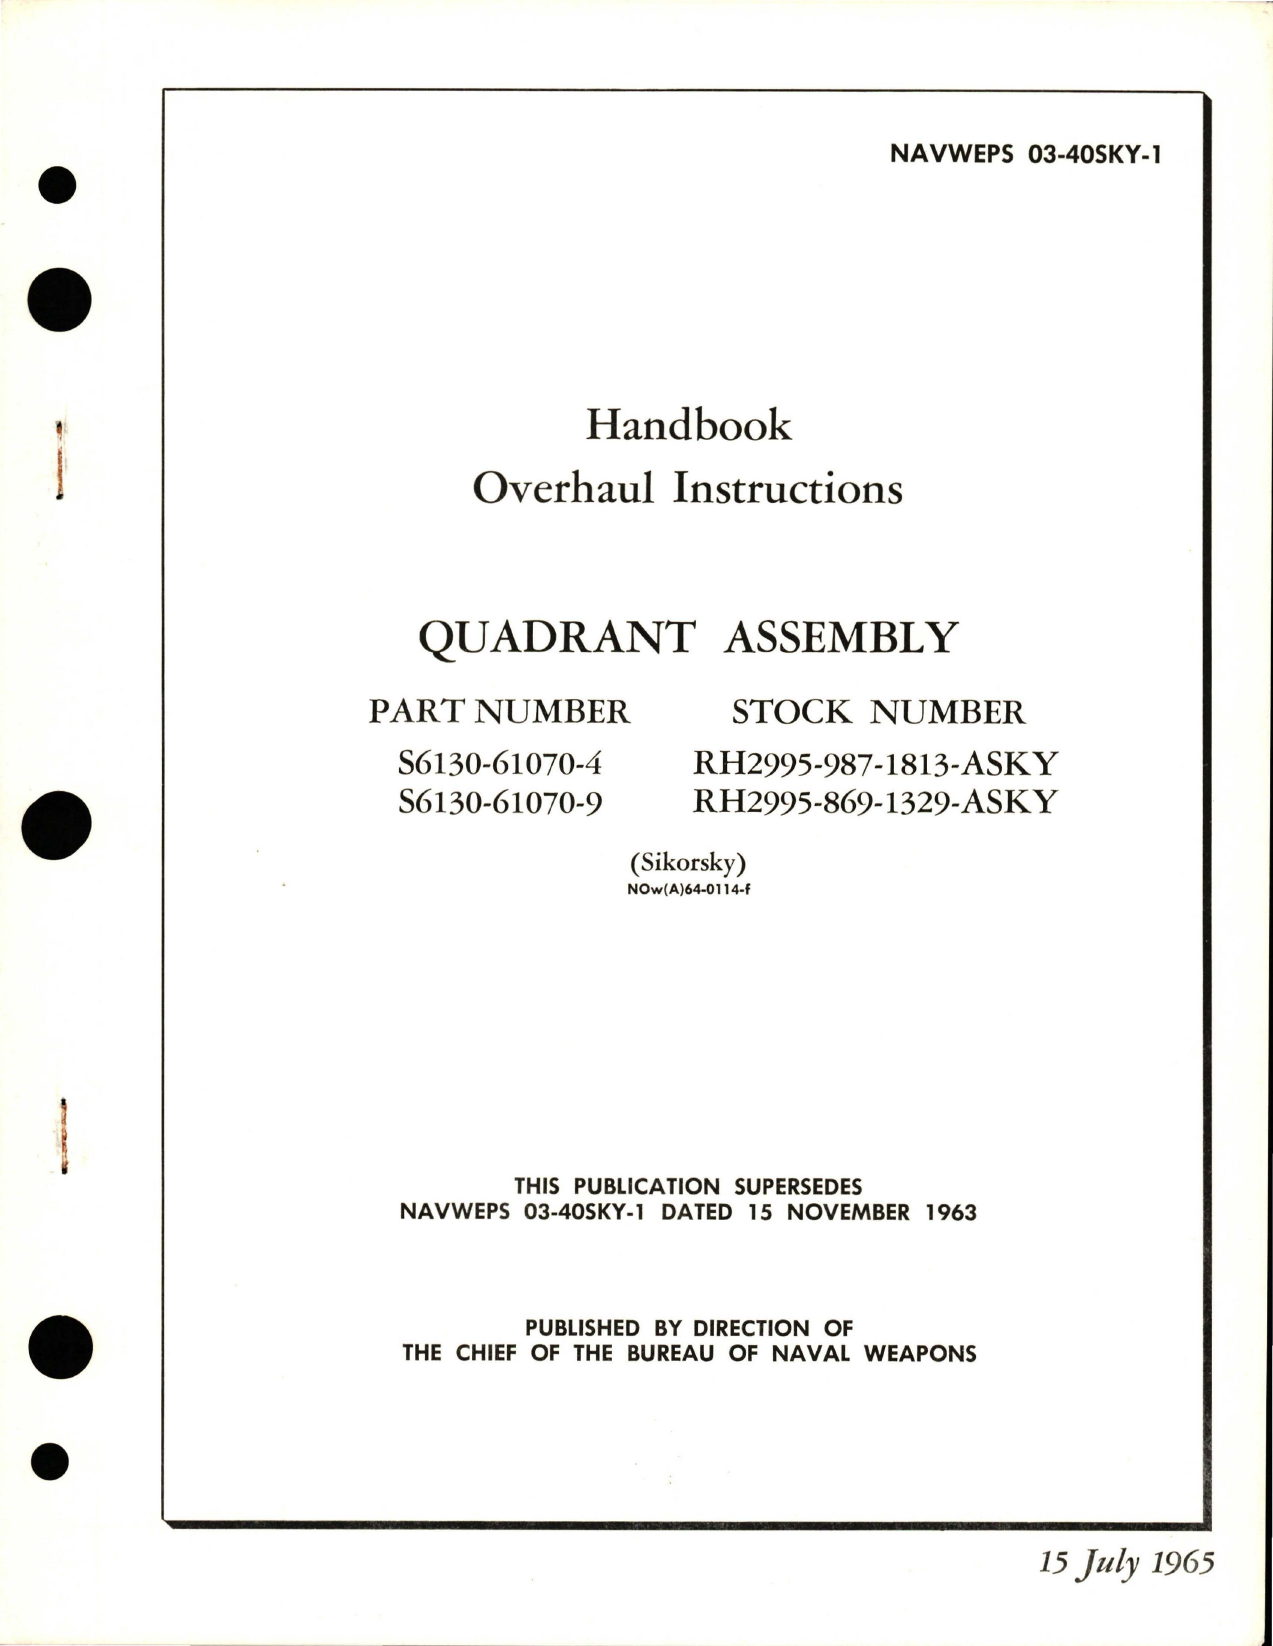 Sample page 1 from AirCorps Library document: Overhaul Instructions for Quadrant Assembly - Parts S6130-61070-4 and S6130-61070-9 